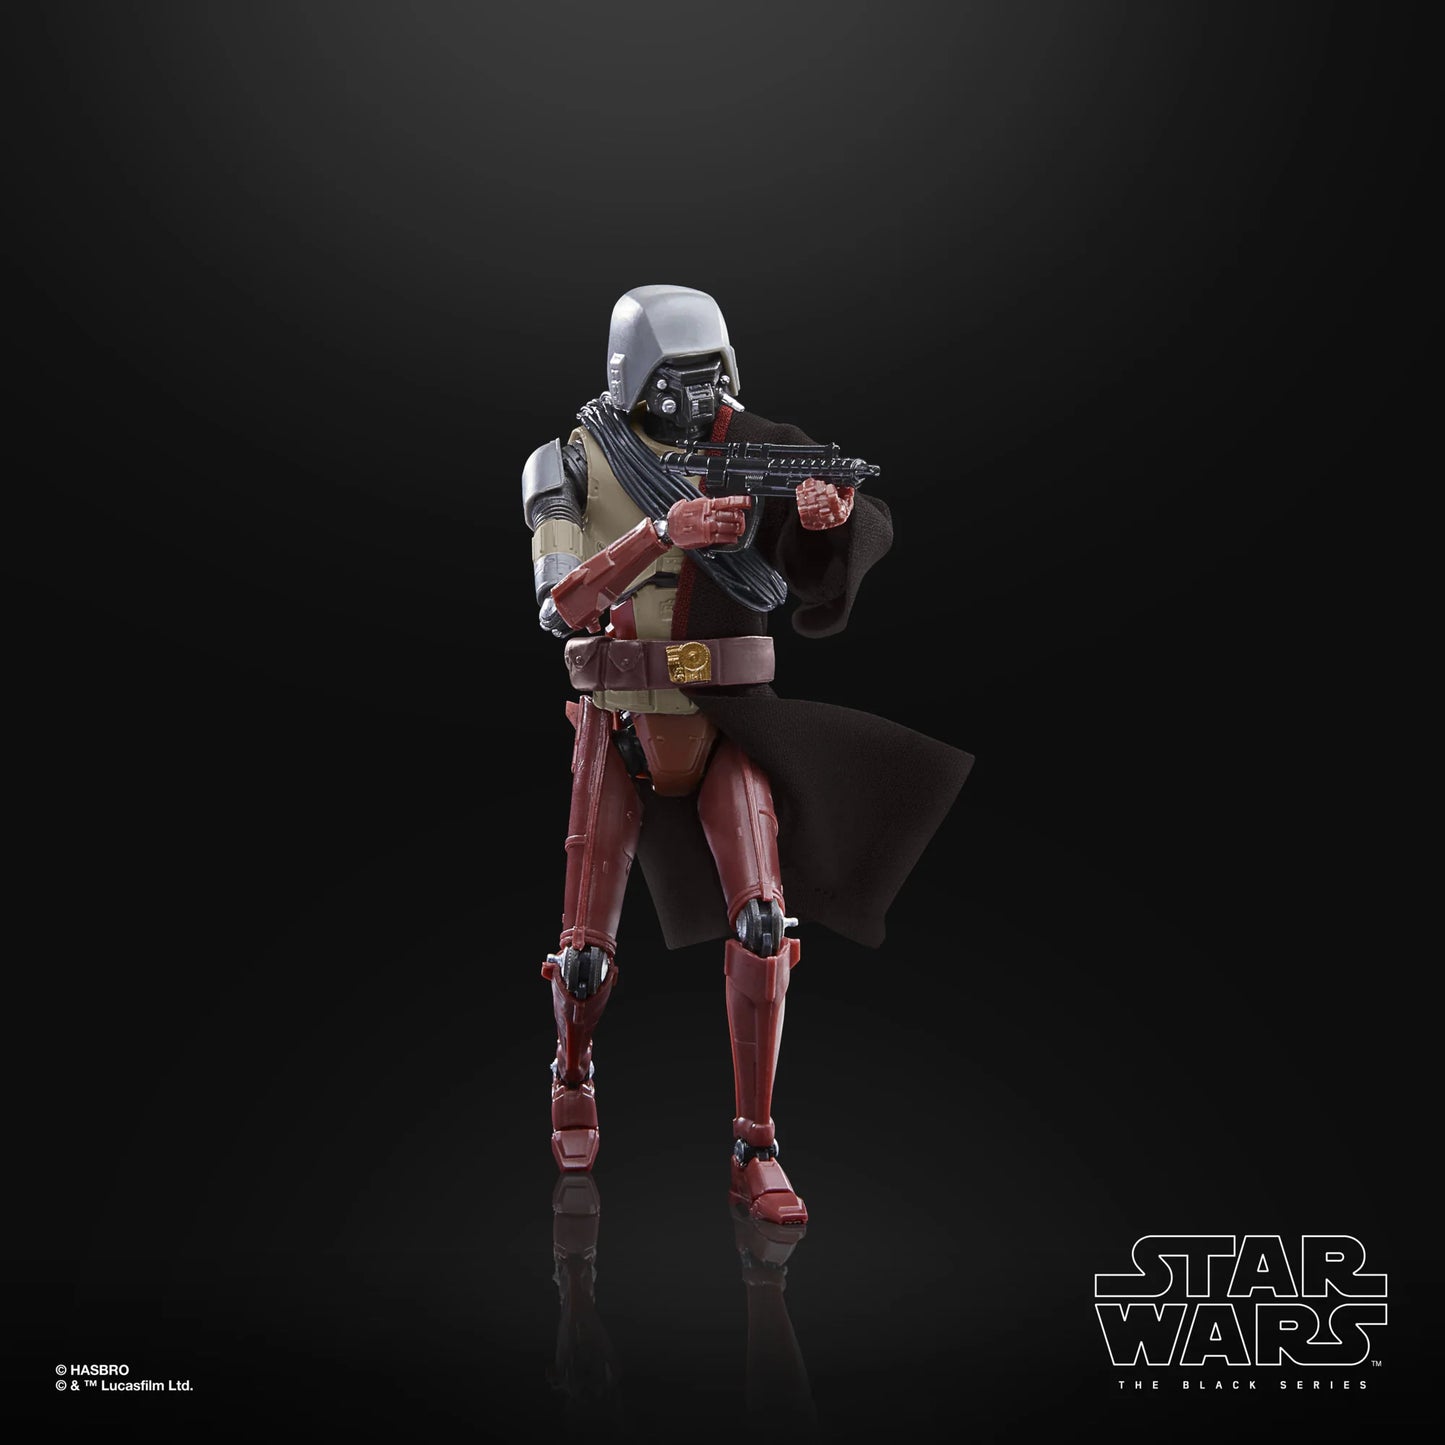 A detailed 6-inch Star Wars The Black Series HK-87 action figure, depicting the antiquated assassin droid design from The Mandalorian, complete with a character-inspired accessory and multiple points of articulation.